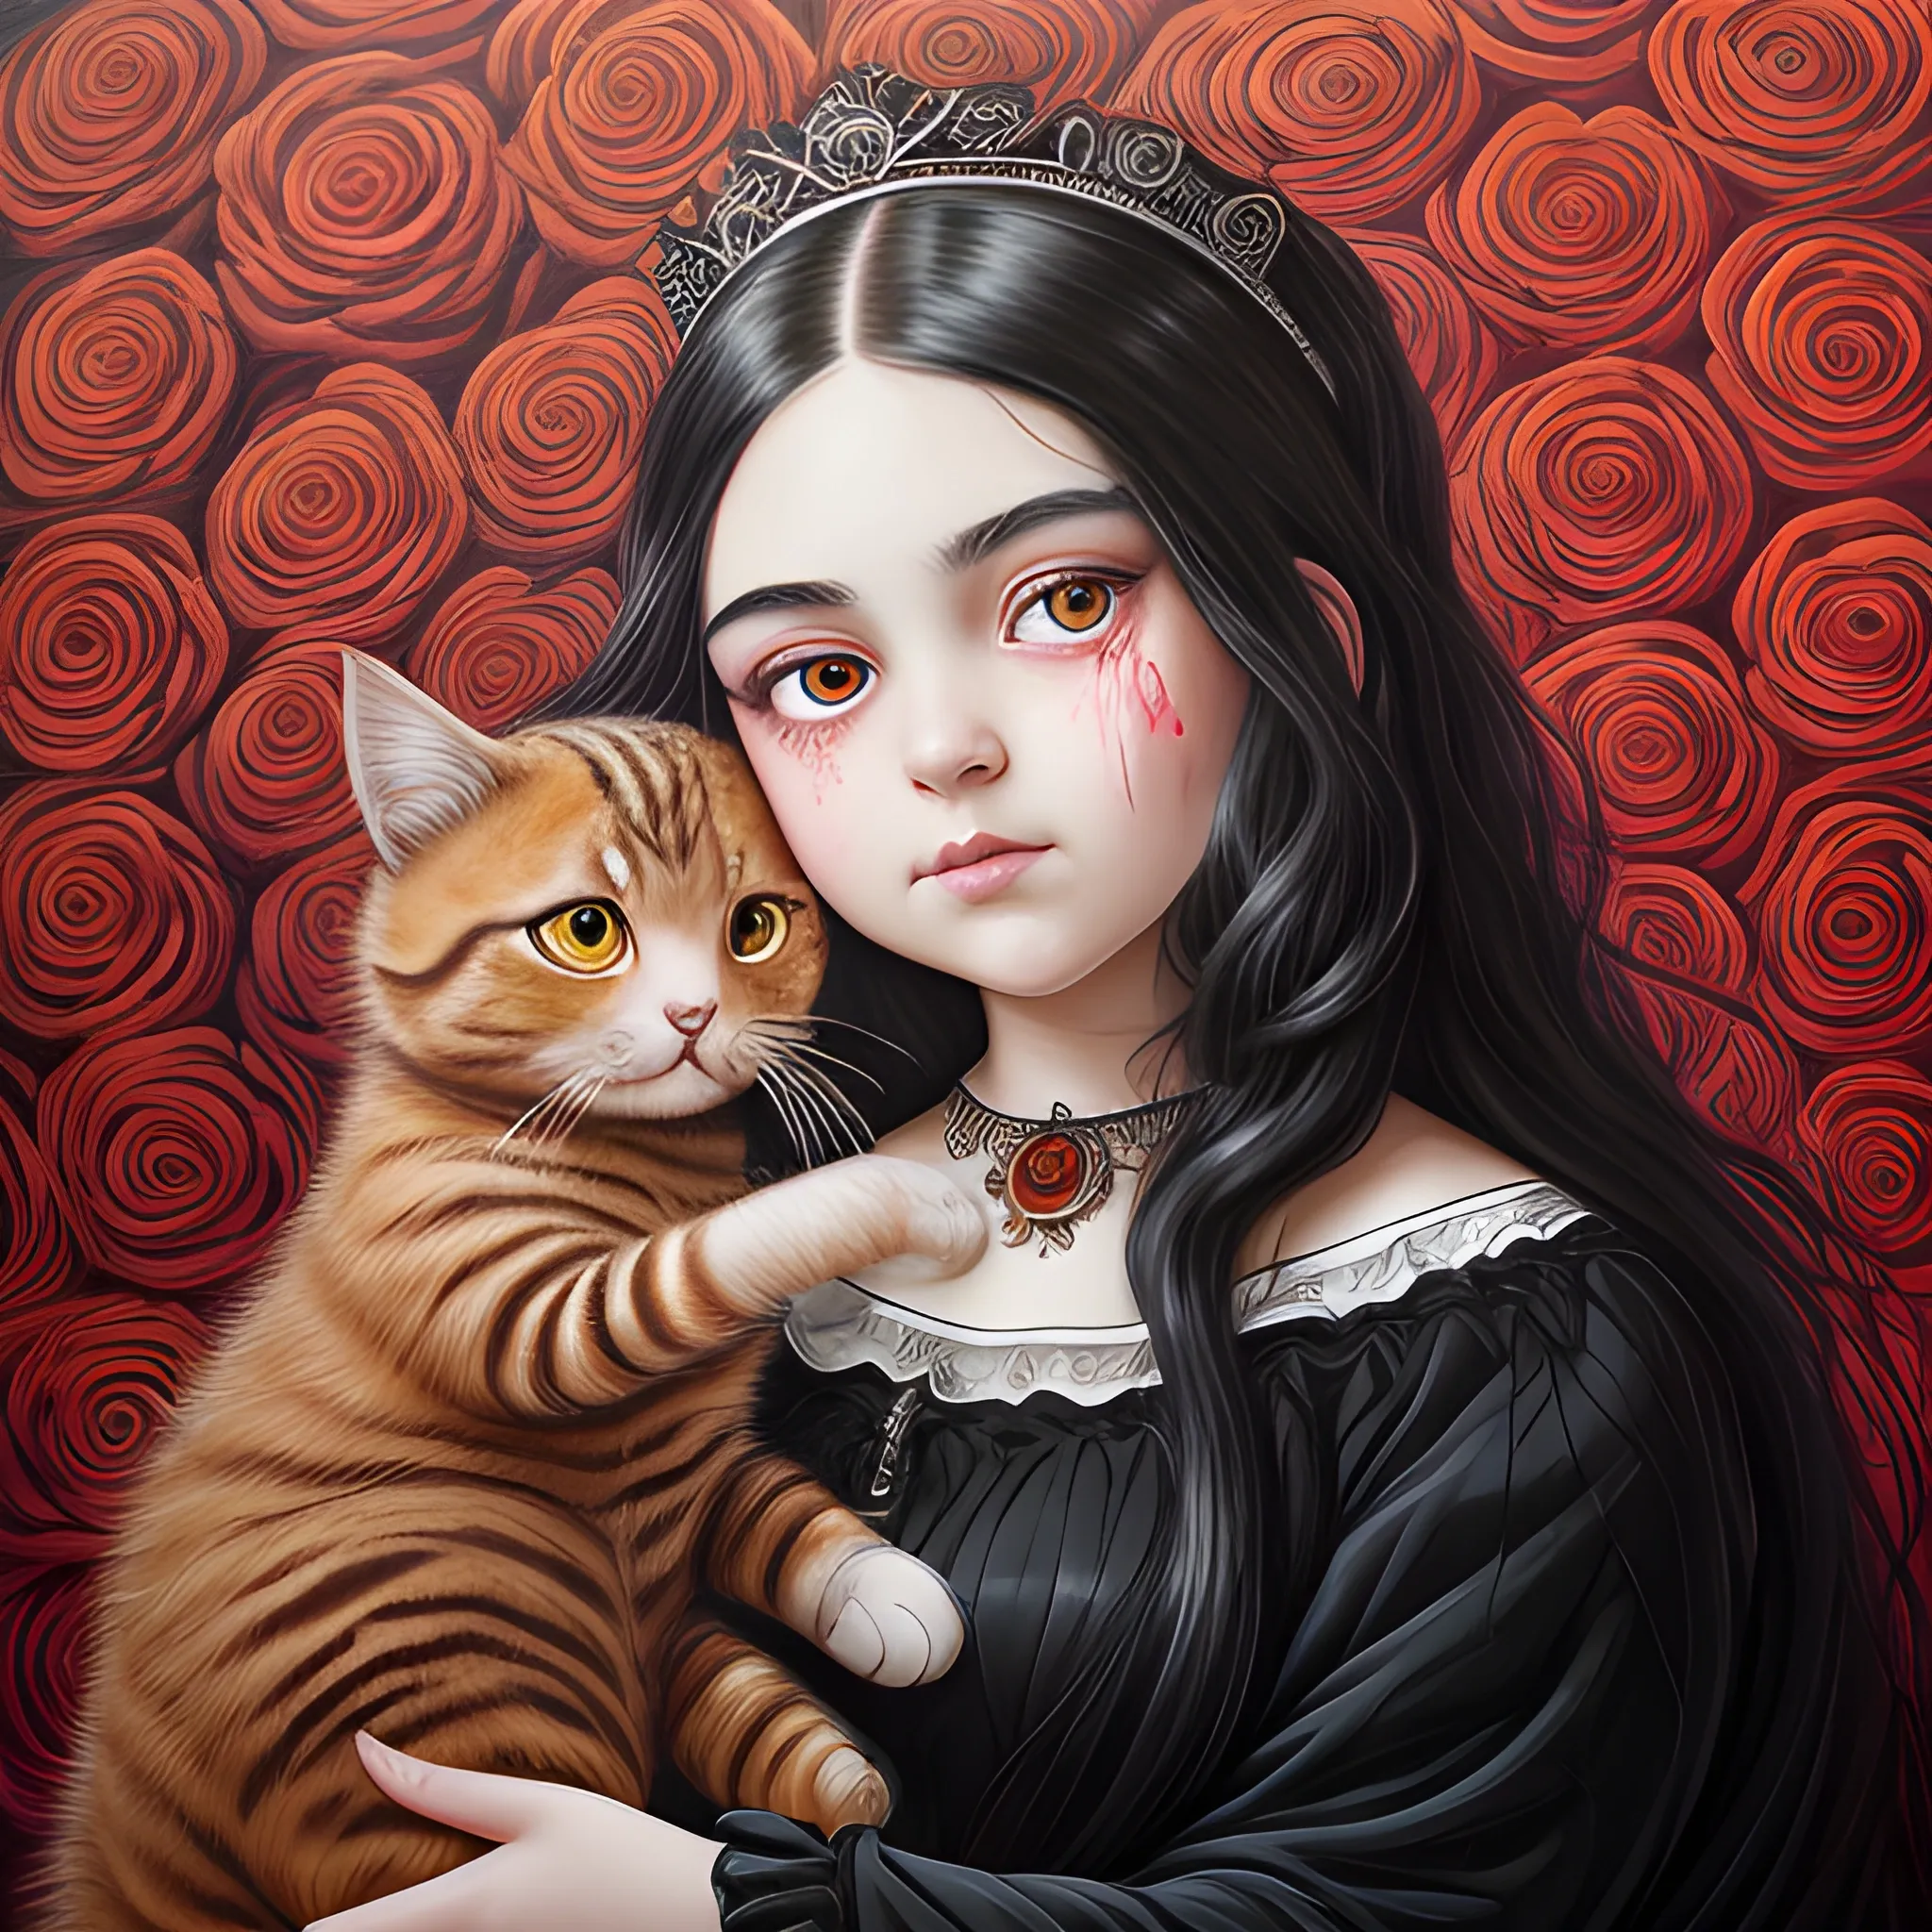 (((high detail))), best quality, Warm Colors, (detailed), (high resolution)Black long-haired female, full body, curvy face, with rosy cheeks, big black eyes, thick eyelashes, thick peach lips, thick eyebrows,  with a black and red dress, roses of backround  
holding a bloody crown in her hand, with a cat in her lap wallper ,Trippy, Oil Painting